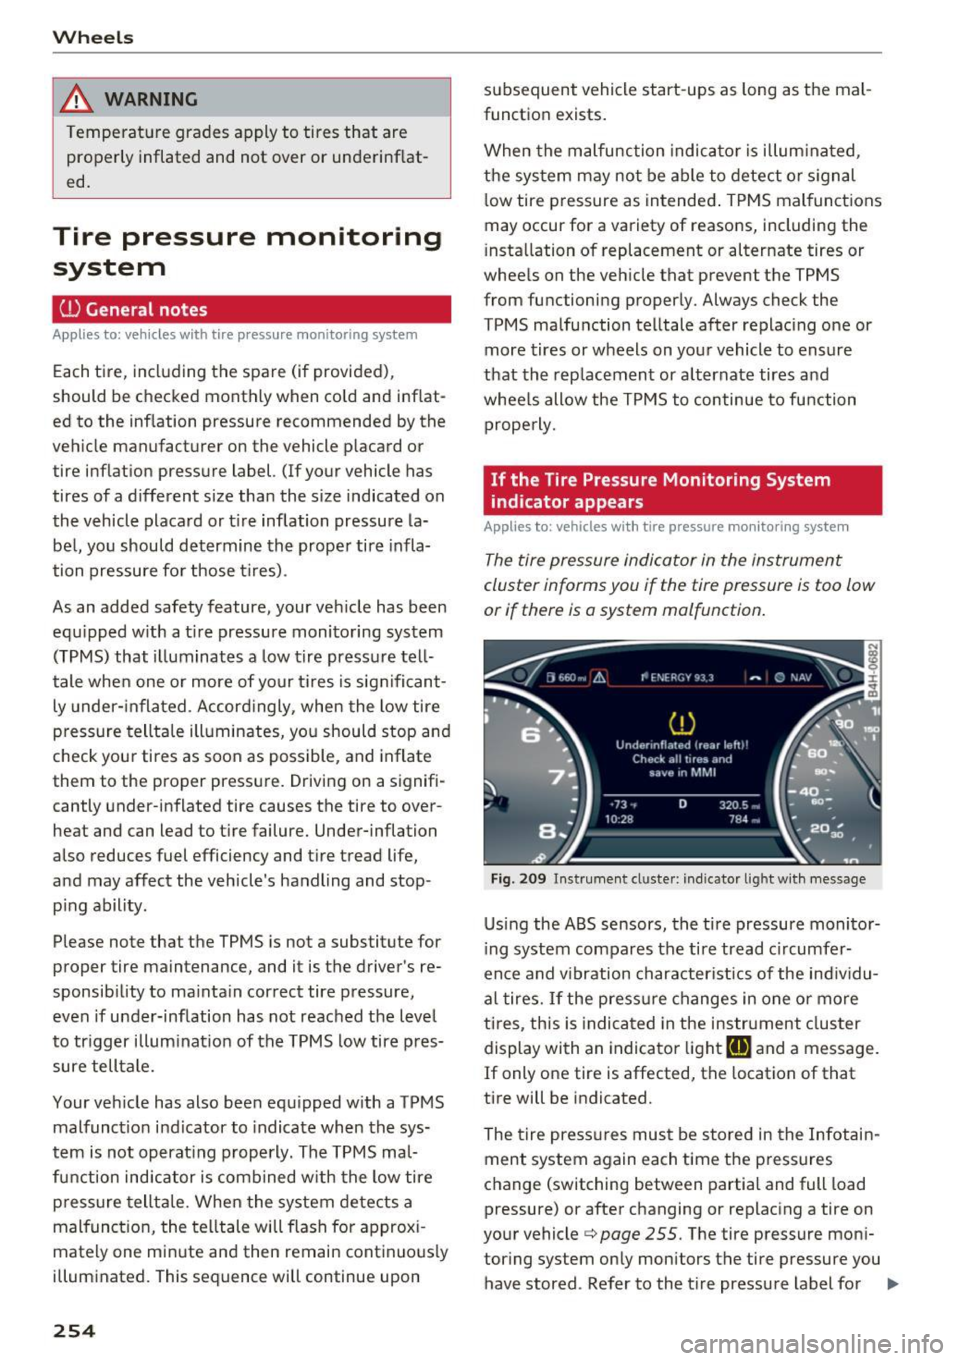 AUDI S8 2016  Owners Manual Wheels 
_& WARNING 
Temperature  grades  apply  to  tires  that  are 
properly  inflated  and  not  over  or  underinf lat ­
ed. 
Tire  pressure  monitoring  system 
U) General  notes 
Applies  to:  